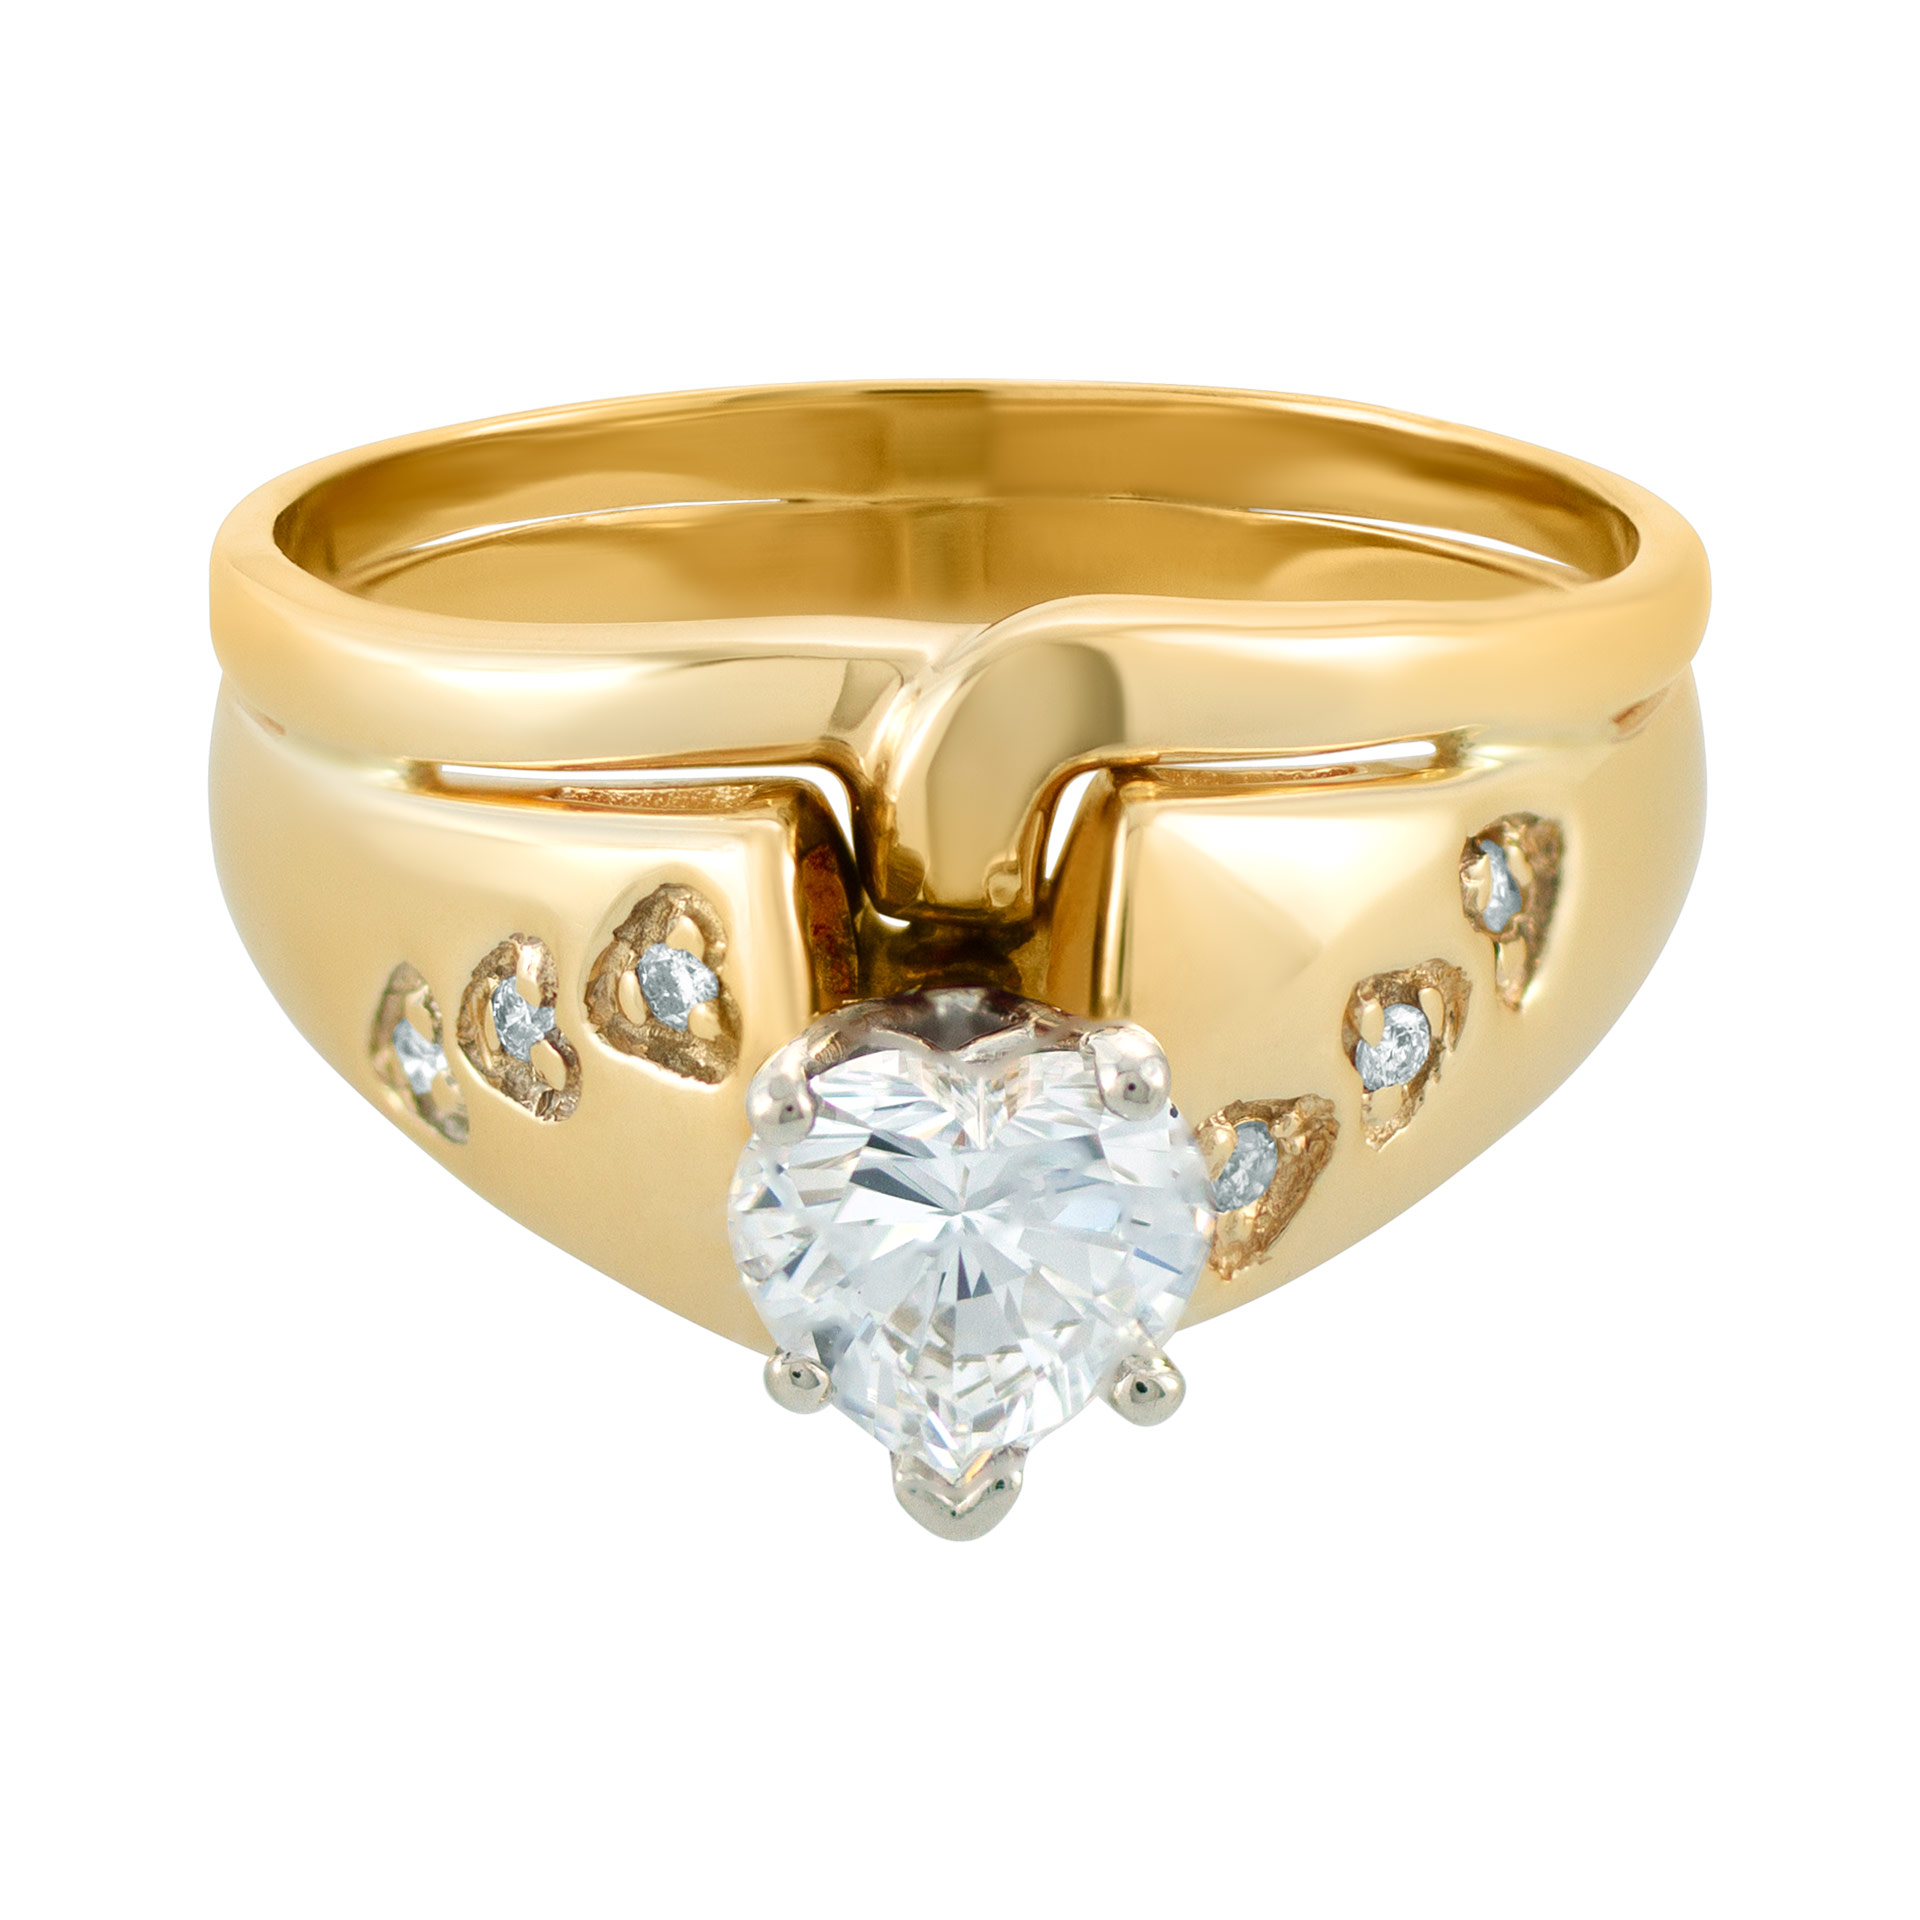 GIA certified heart-shaped diamond 1carat (F color, VS2 clarity) ring set in 14k yellow gold. Size 10.5 image 1